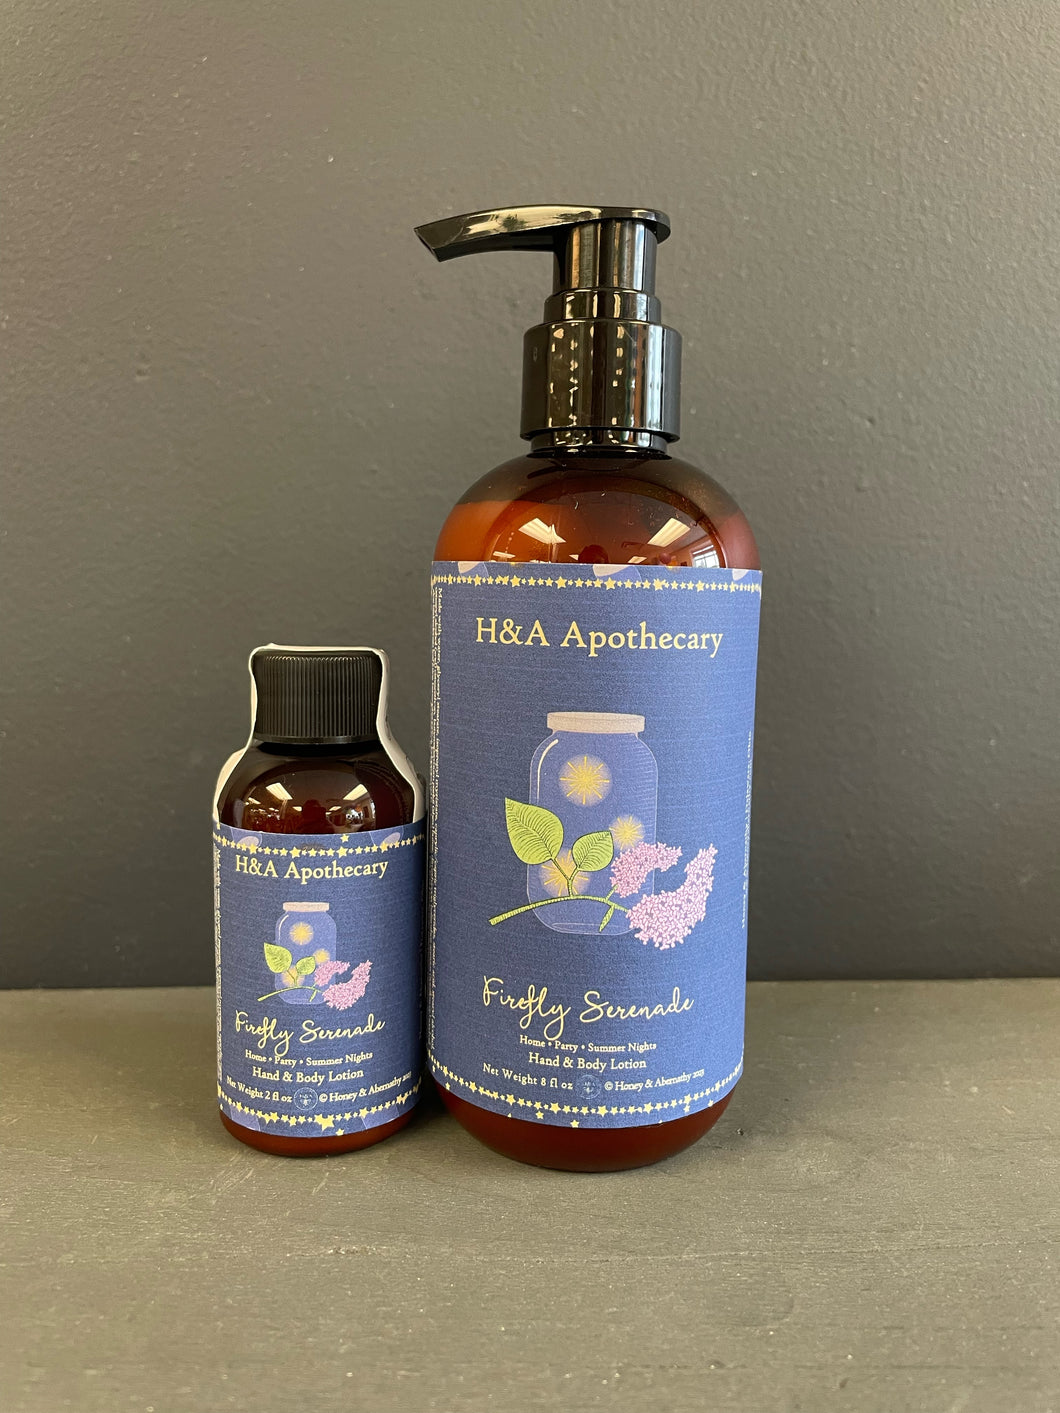 H&A Apothecary Firefly Serenade Hand & Body Lotion